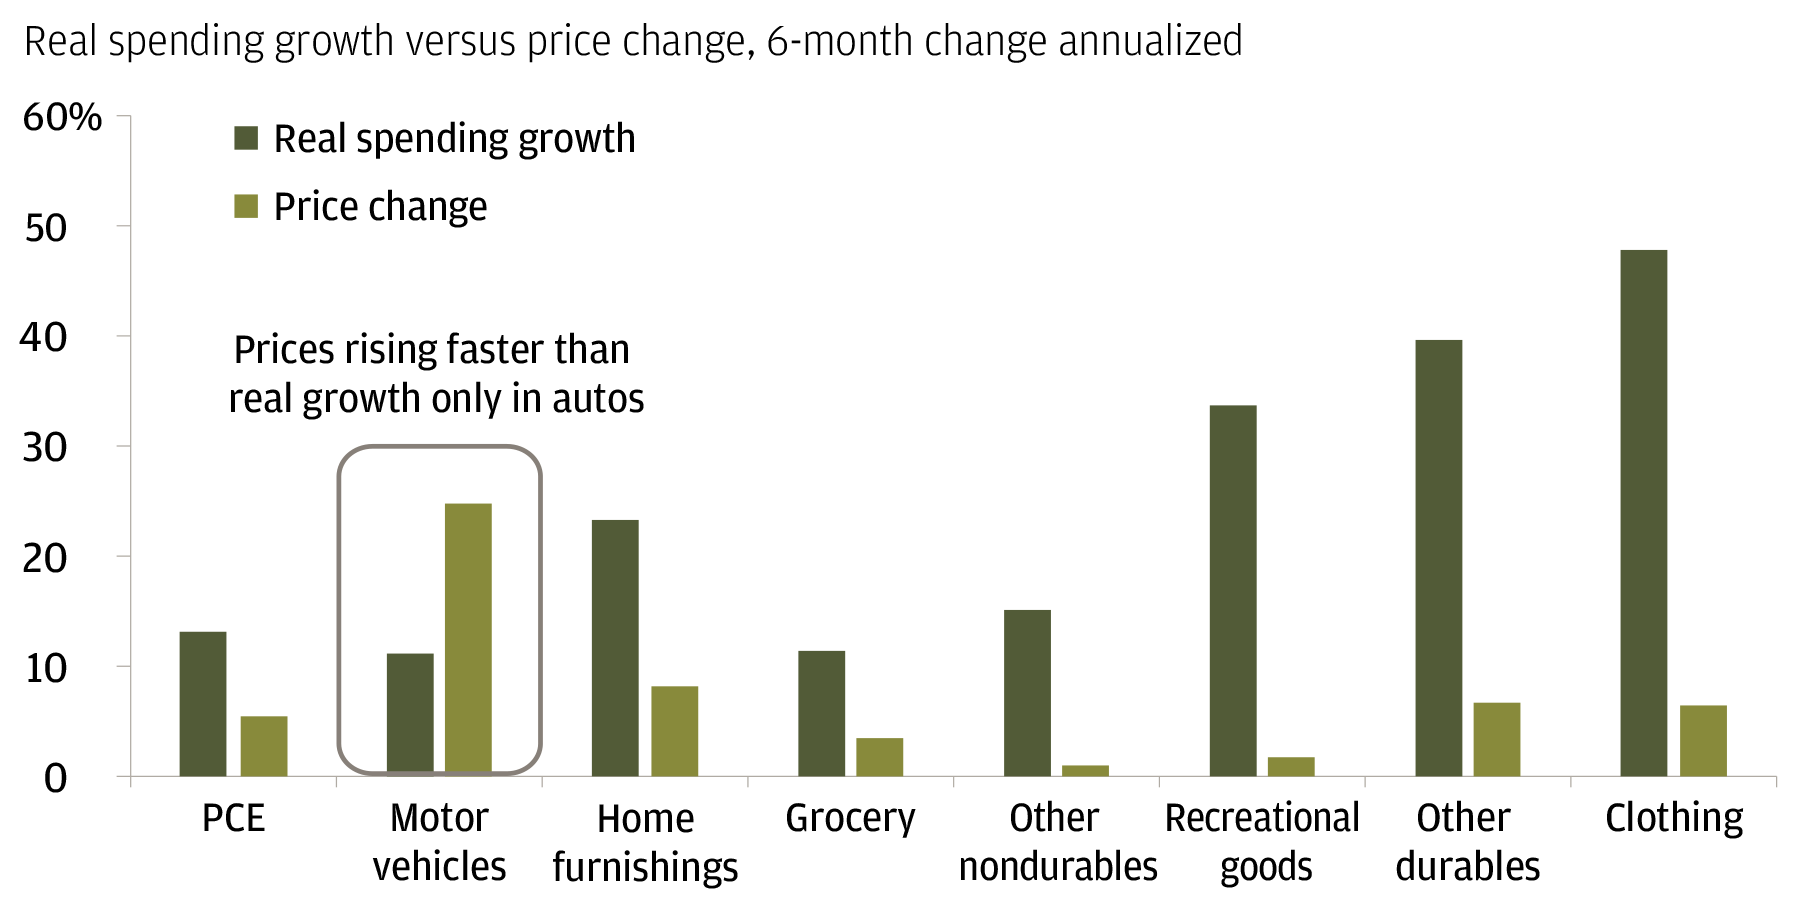 This bar chart shows real price change versus real spending growth across PCE, motor vehicles, home furnishings, groceries, other nondurables, recreational goods, other durables and clothing. Real spending growth outpaced real price change across all sectors except motor vehicles.